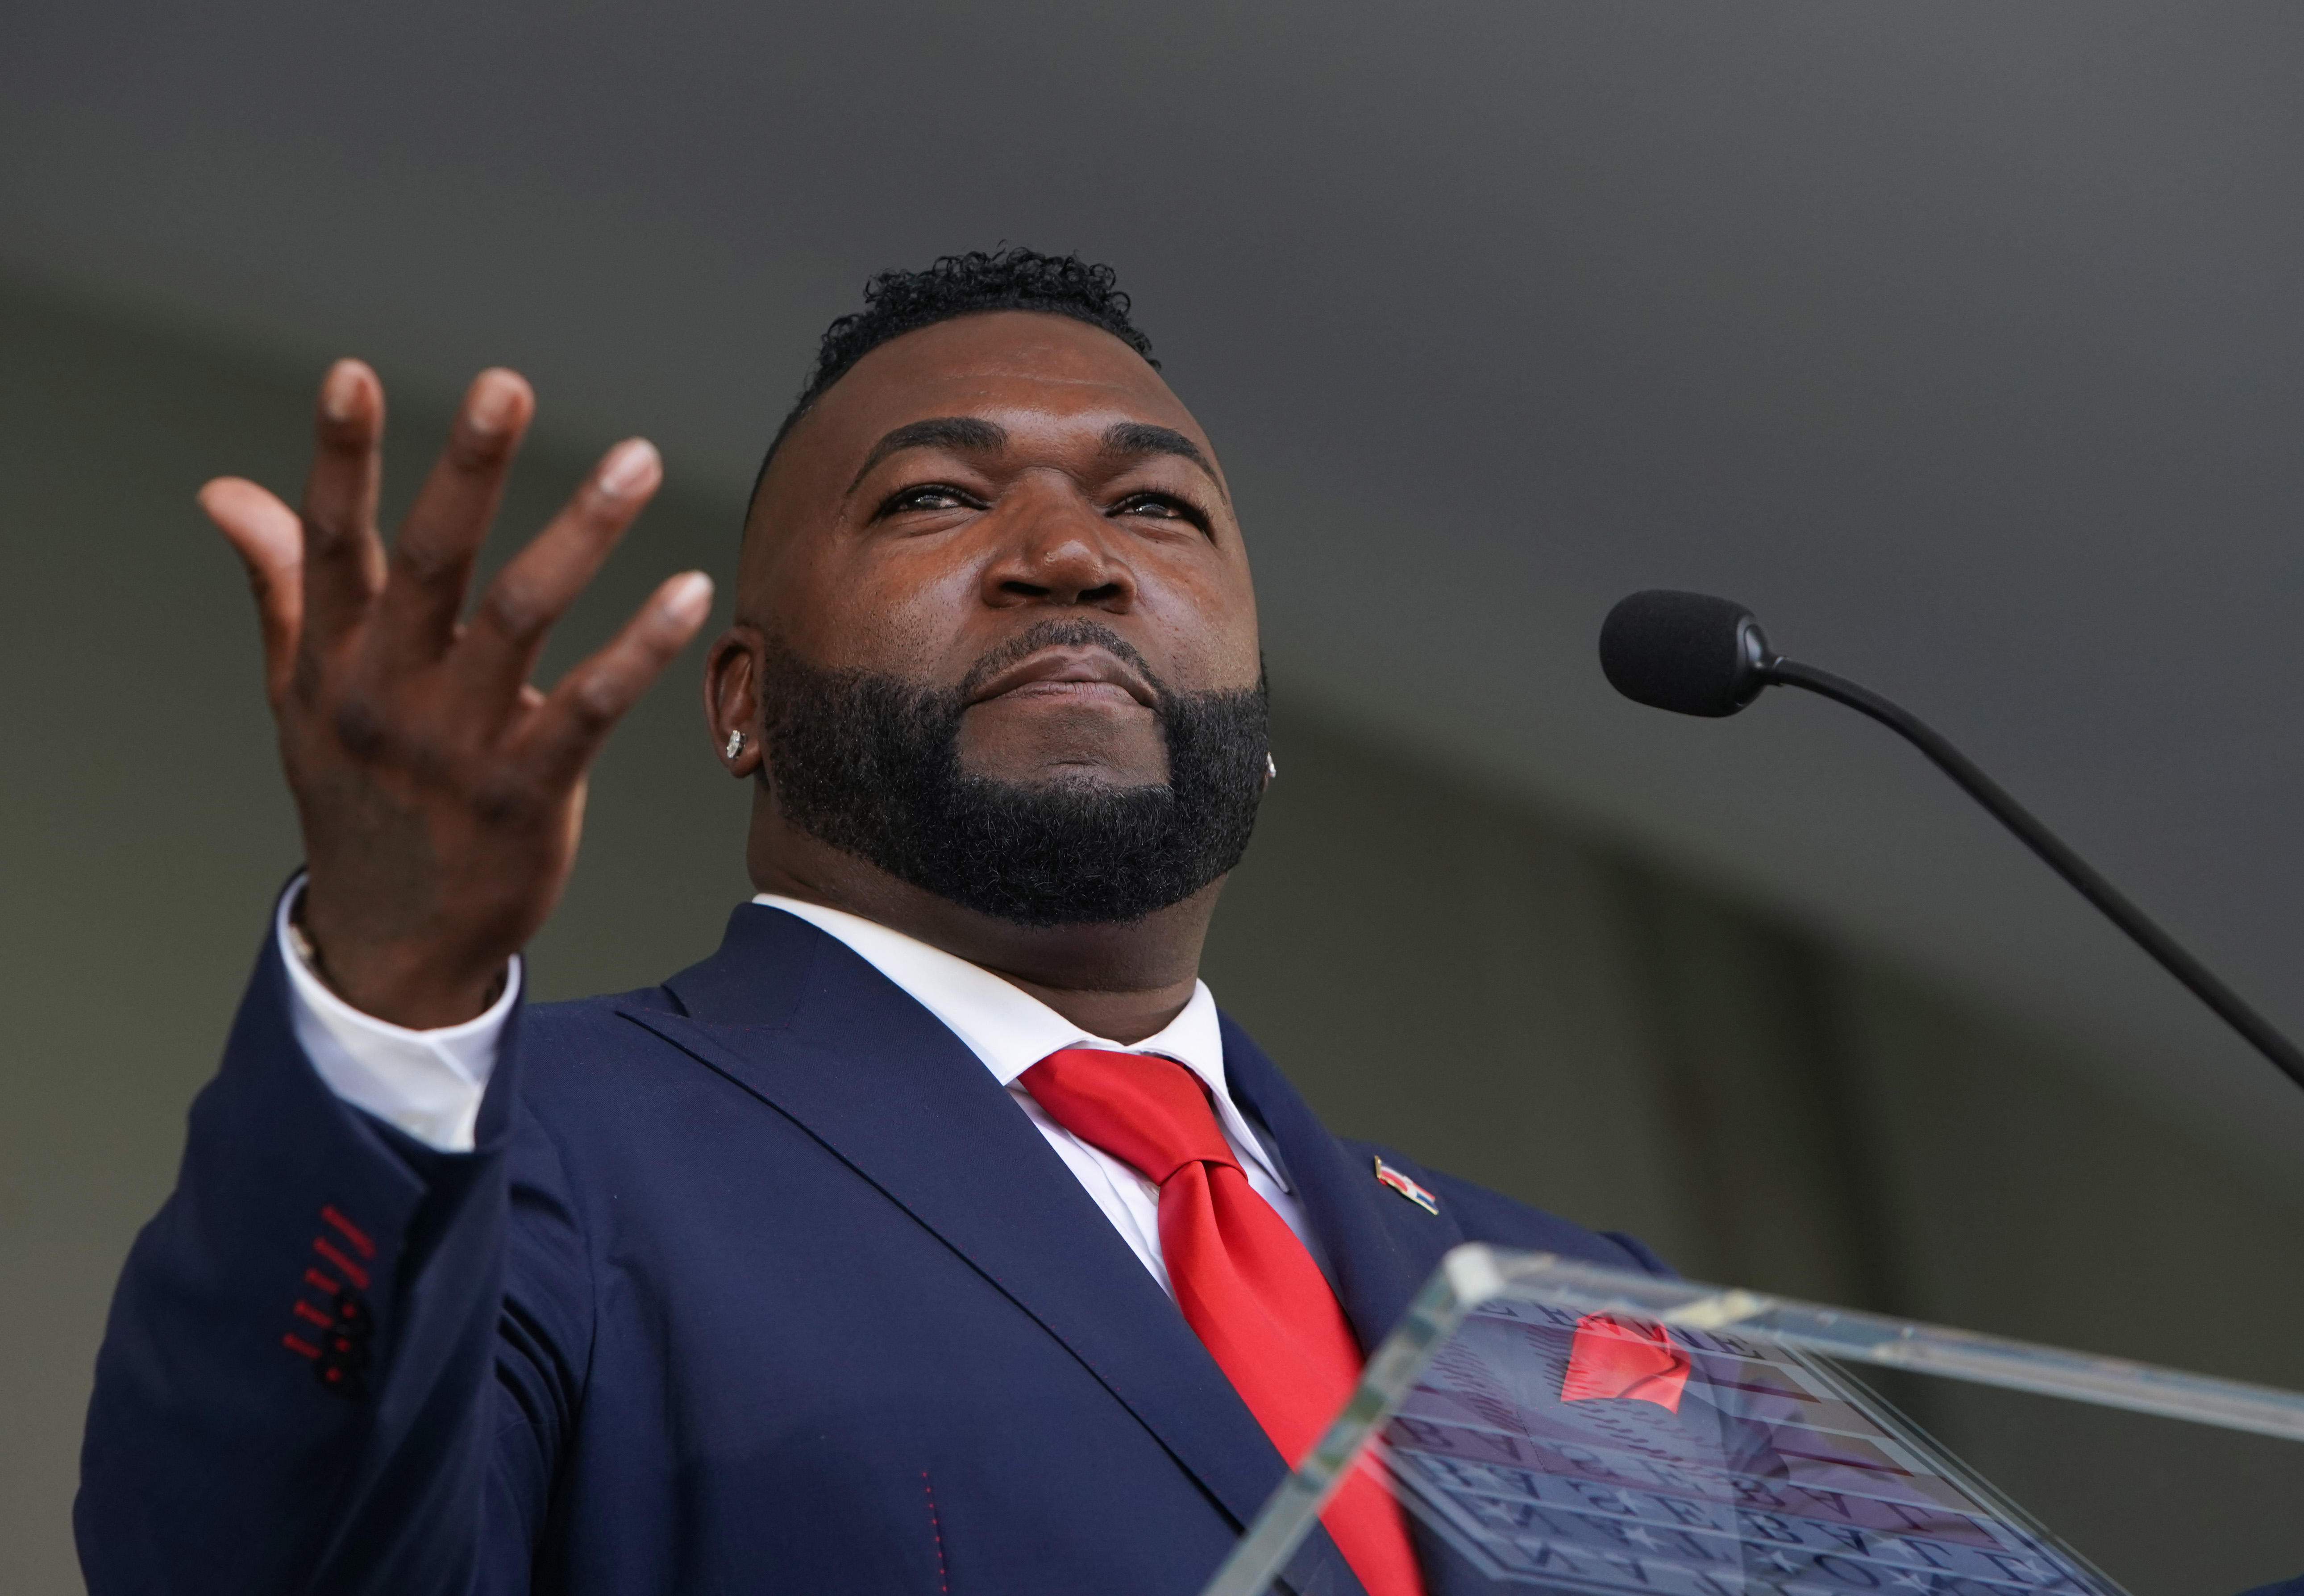 In a heartfelt Hall of Fame induction speech, Red Sox great David Ortiz  touched 'em all - The Boston Globe